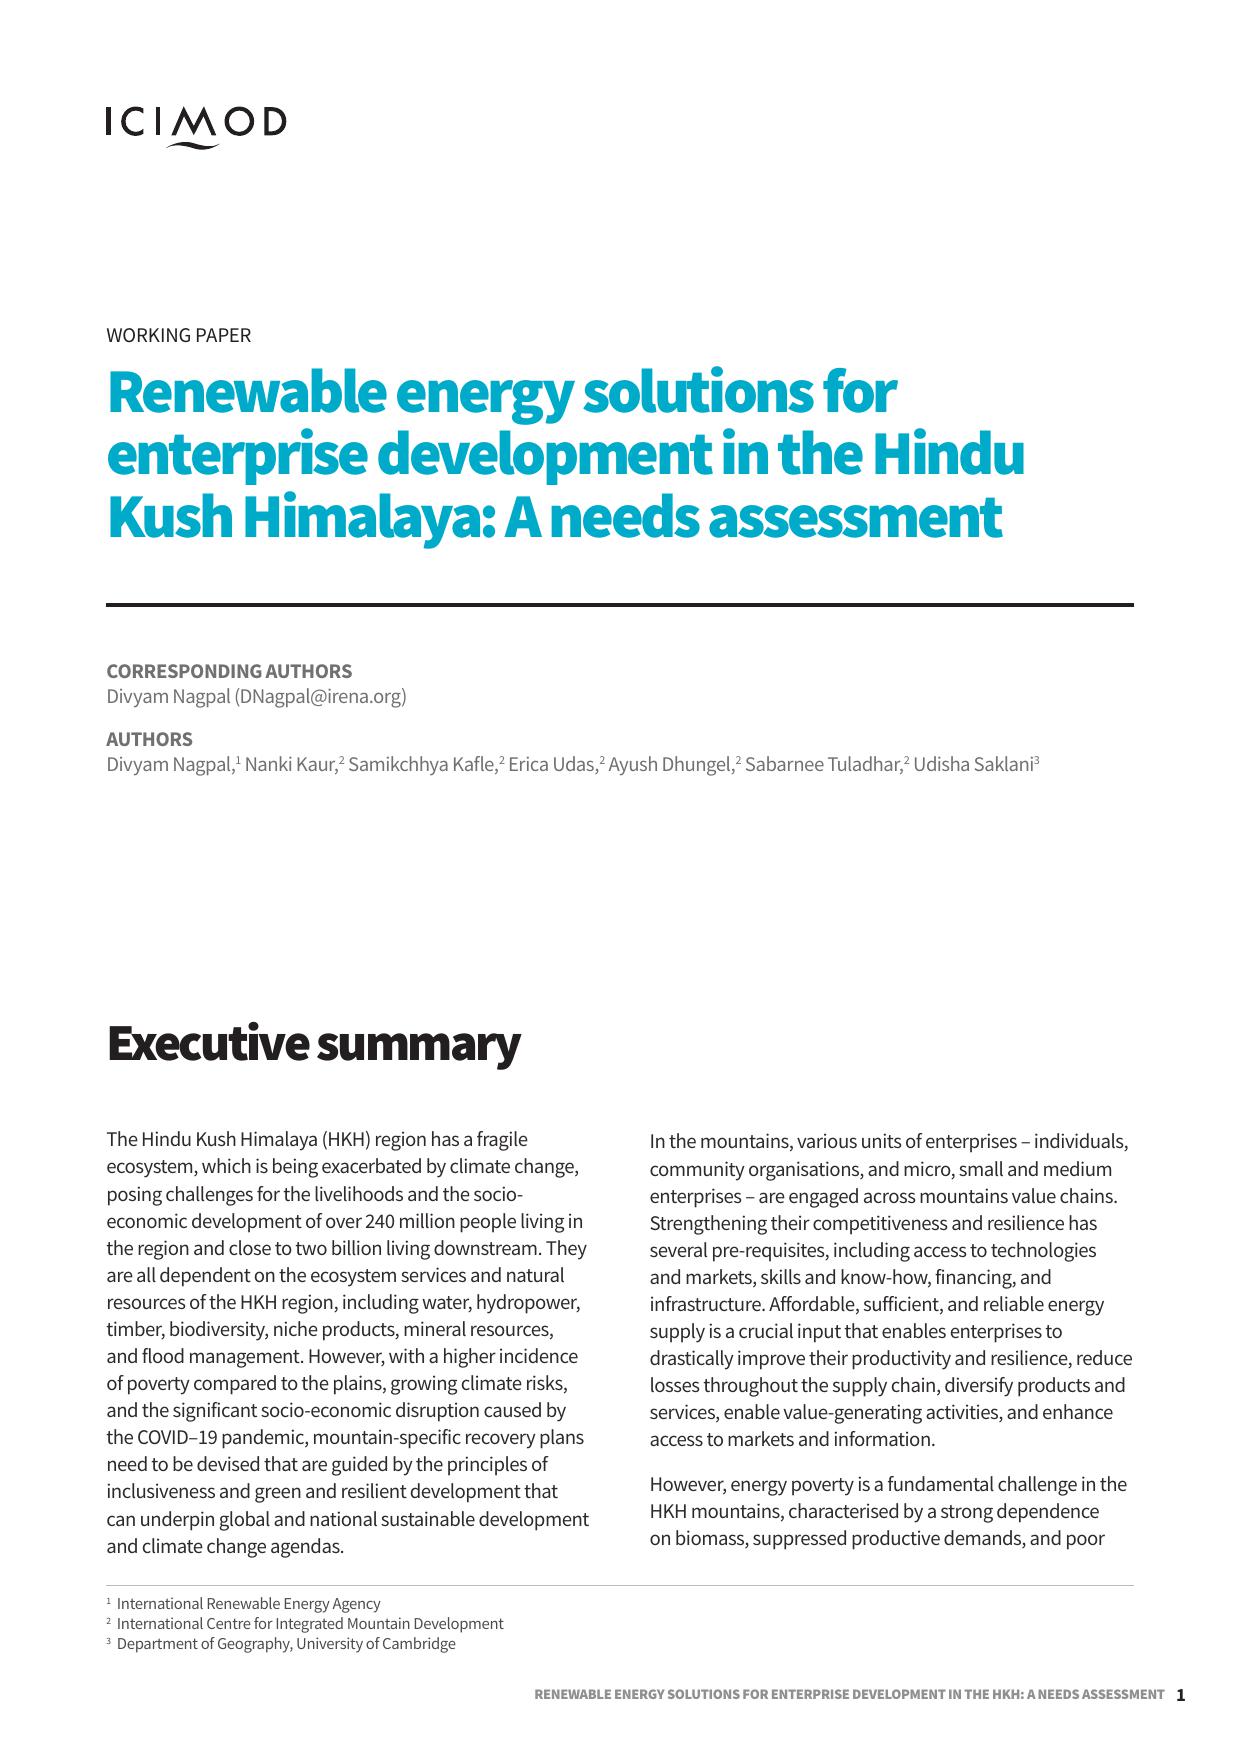 Renewable energy solutions for enterprise development in the Hindu Kush Himalaya: A needs assessment - working paper